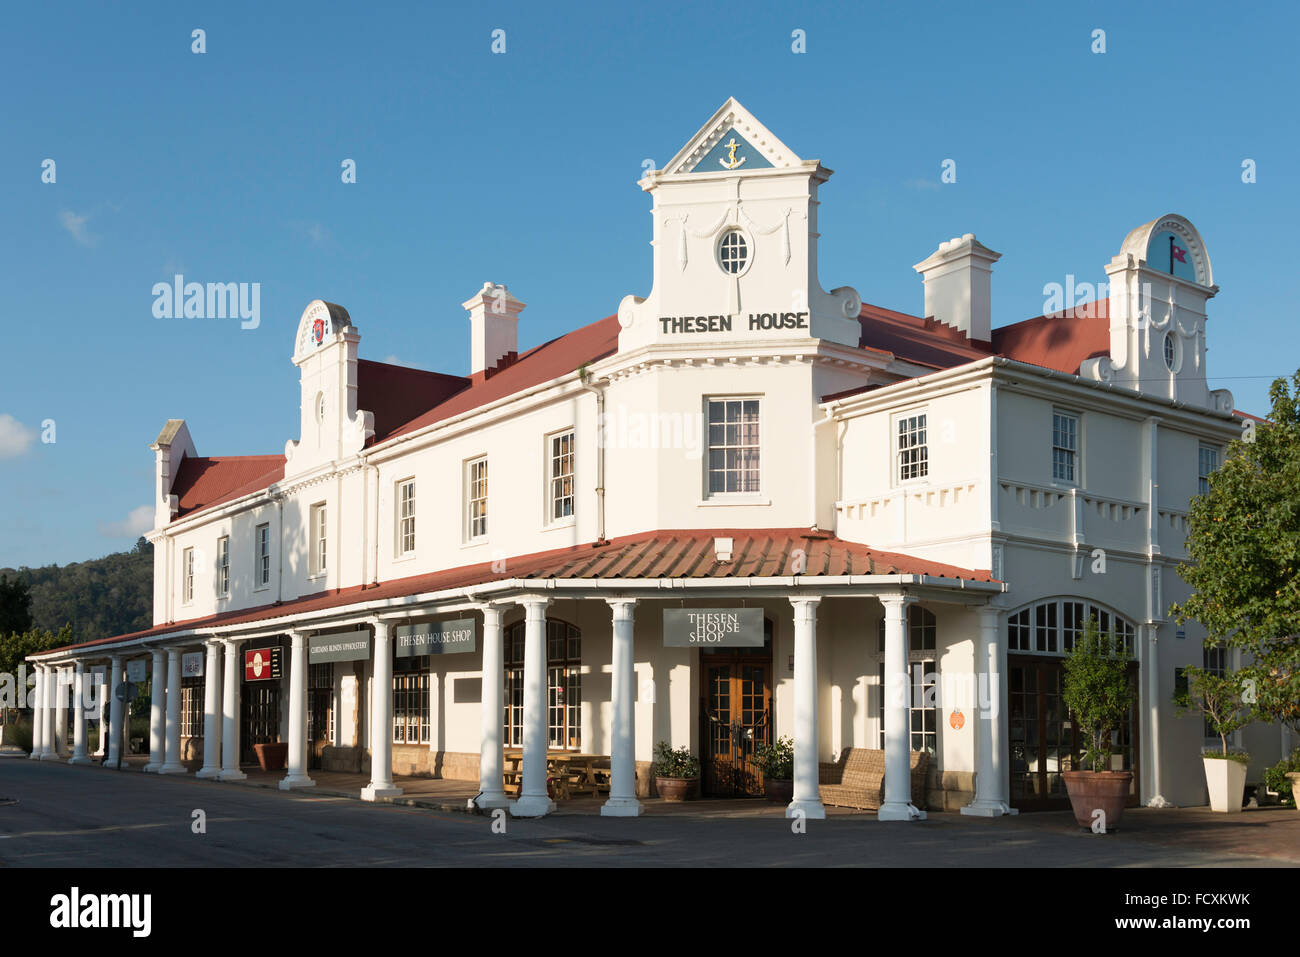 Thesen House, Thesen Island, Knysna, Eden District Municipality, Western Cape Province, Republic of South Africa Stock Photo